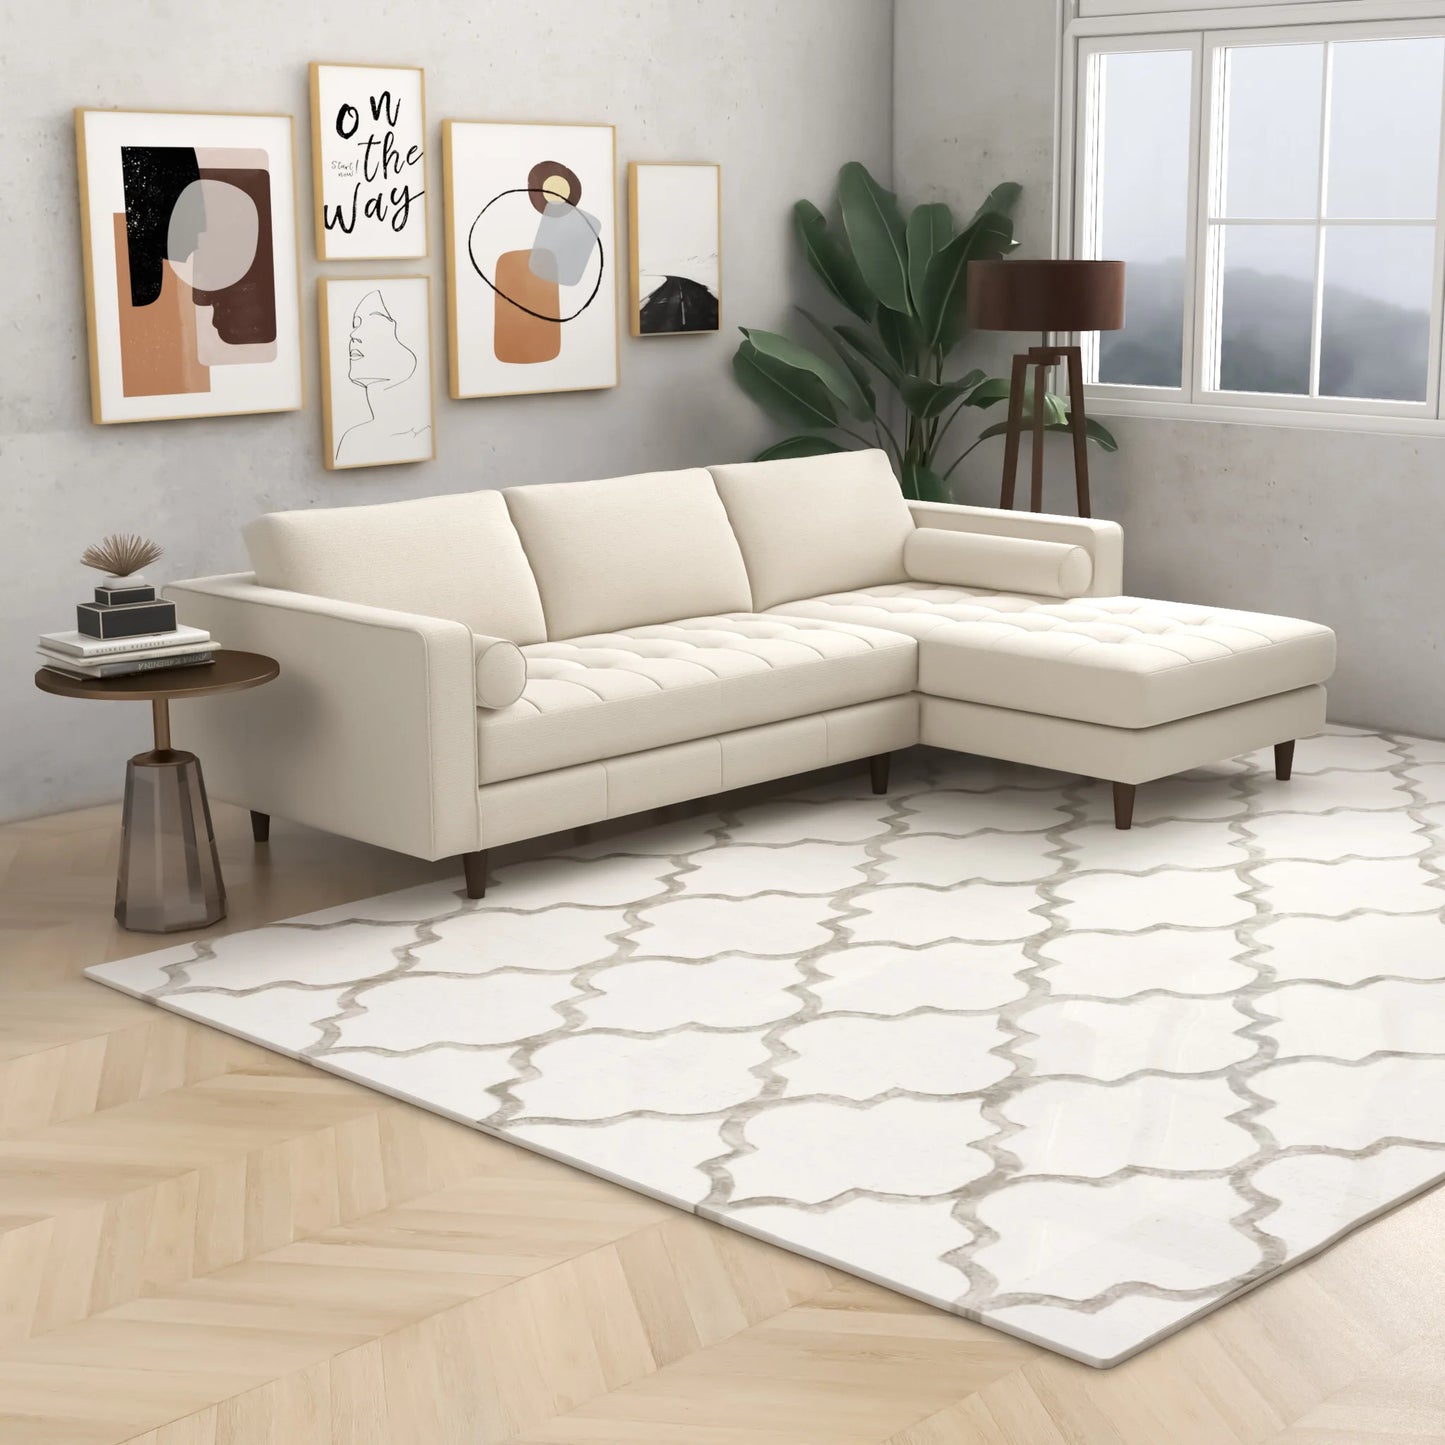 Daphne Sectional Couch Right Facing - Cream Boucle